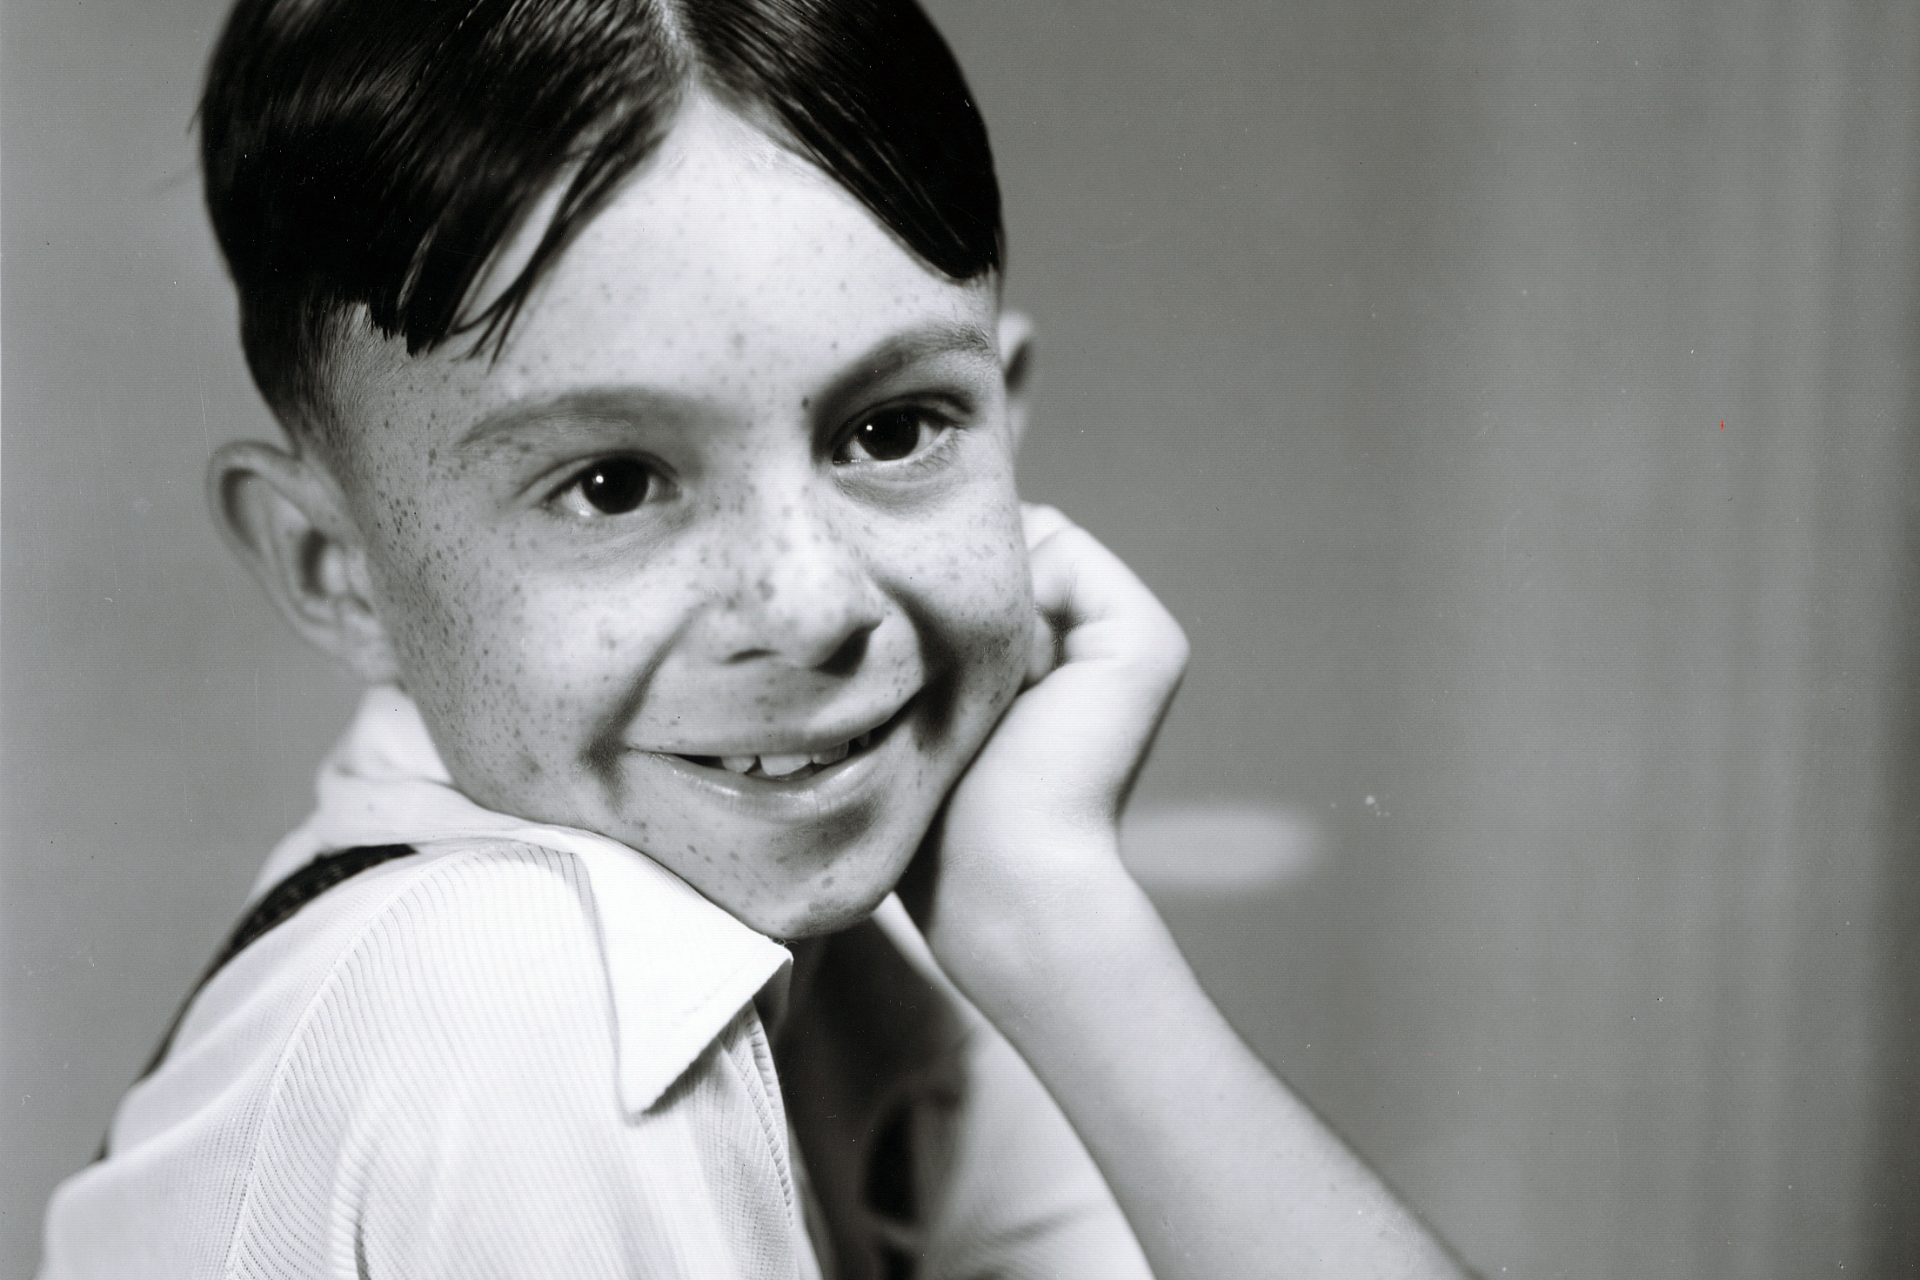 <p>31 years old - The mythical Alfalfa of 'Little Rascals' was the star of MGM before a strange misunderstanding tragically ended his life. He went to the house of an acquaintance who he thought owed him money and threatened the man with a knife. The alleged debtor defended himself by shooting Alfalfa with a .38 that caused his death within a few hours. As it turned out, it was someone else who had owed him the money.</p>